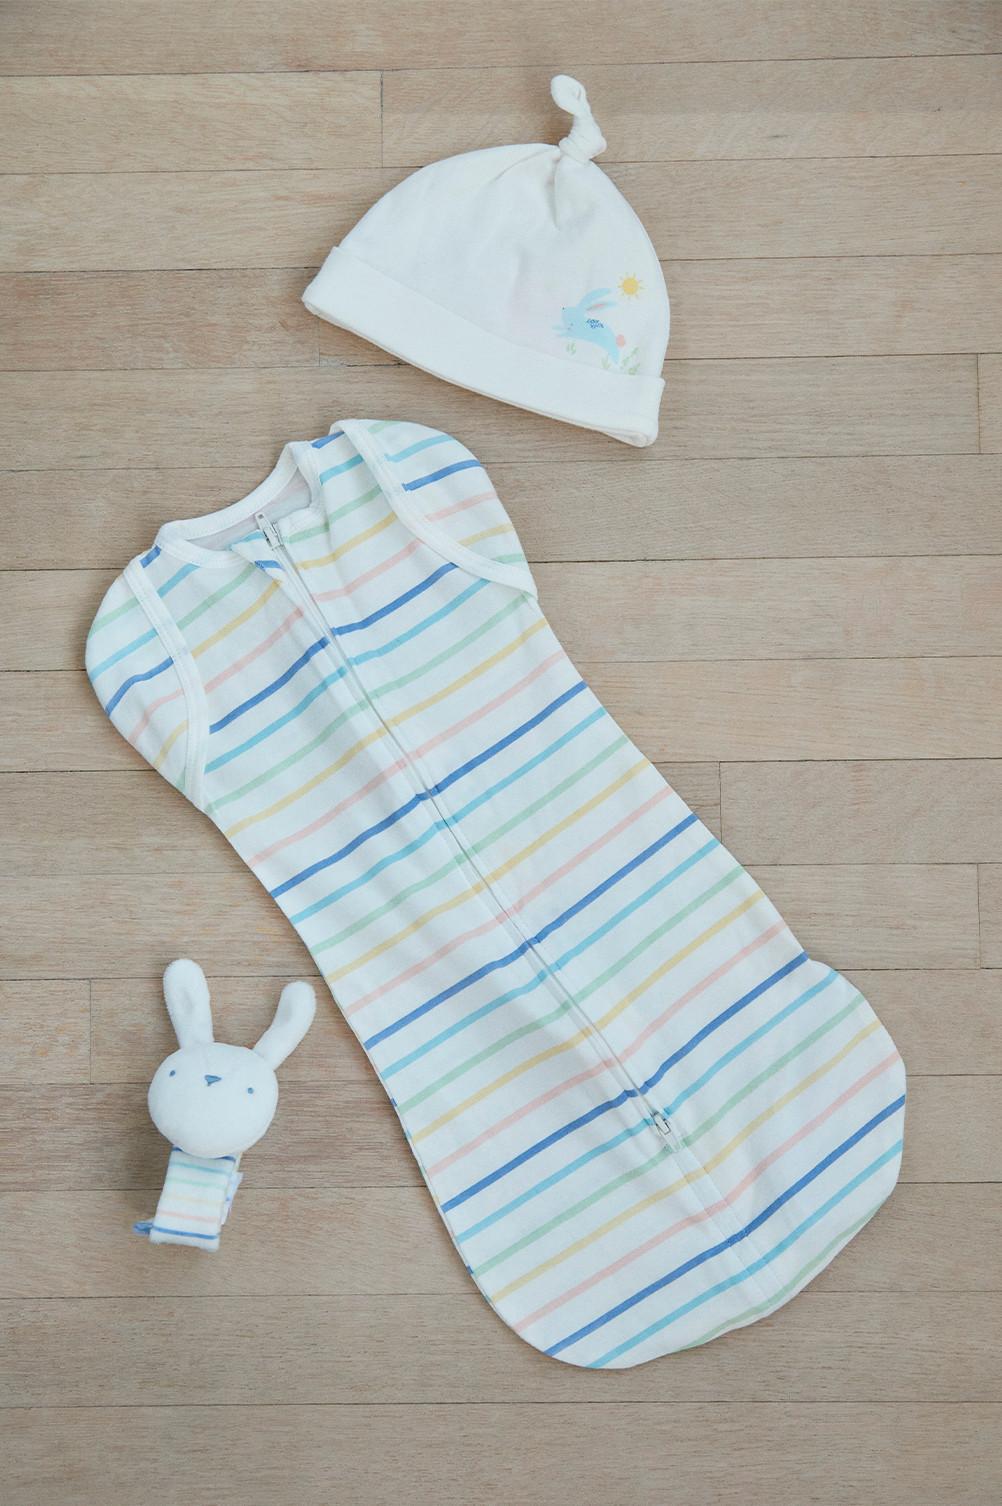 Striped baby sleeping bag set, with matching white hat and bunny toy